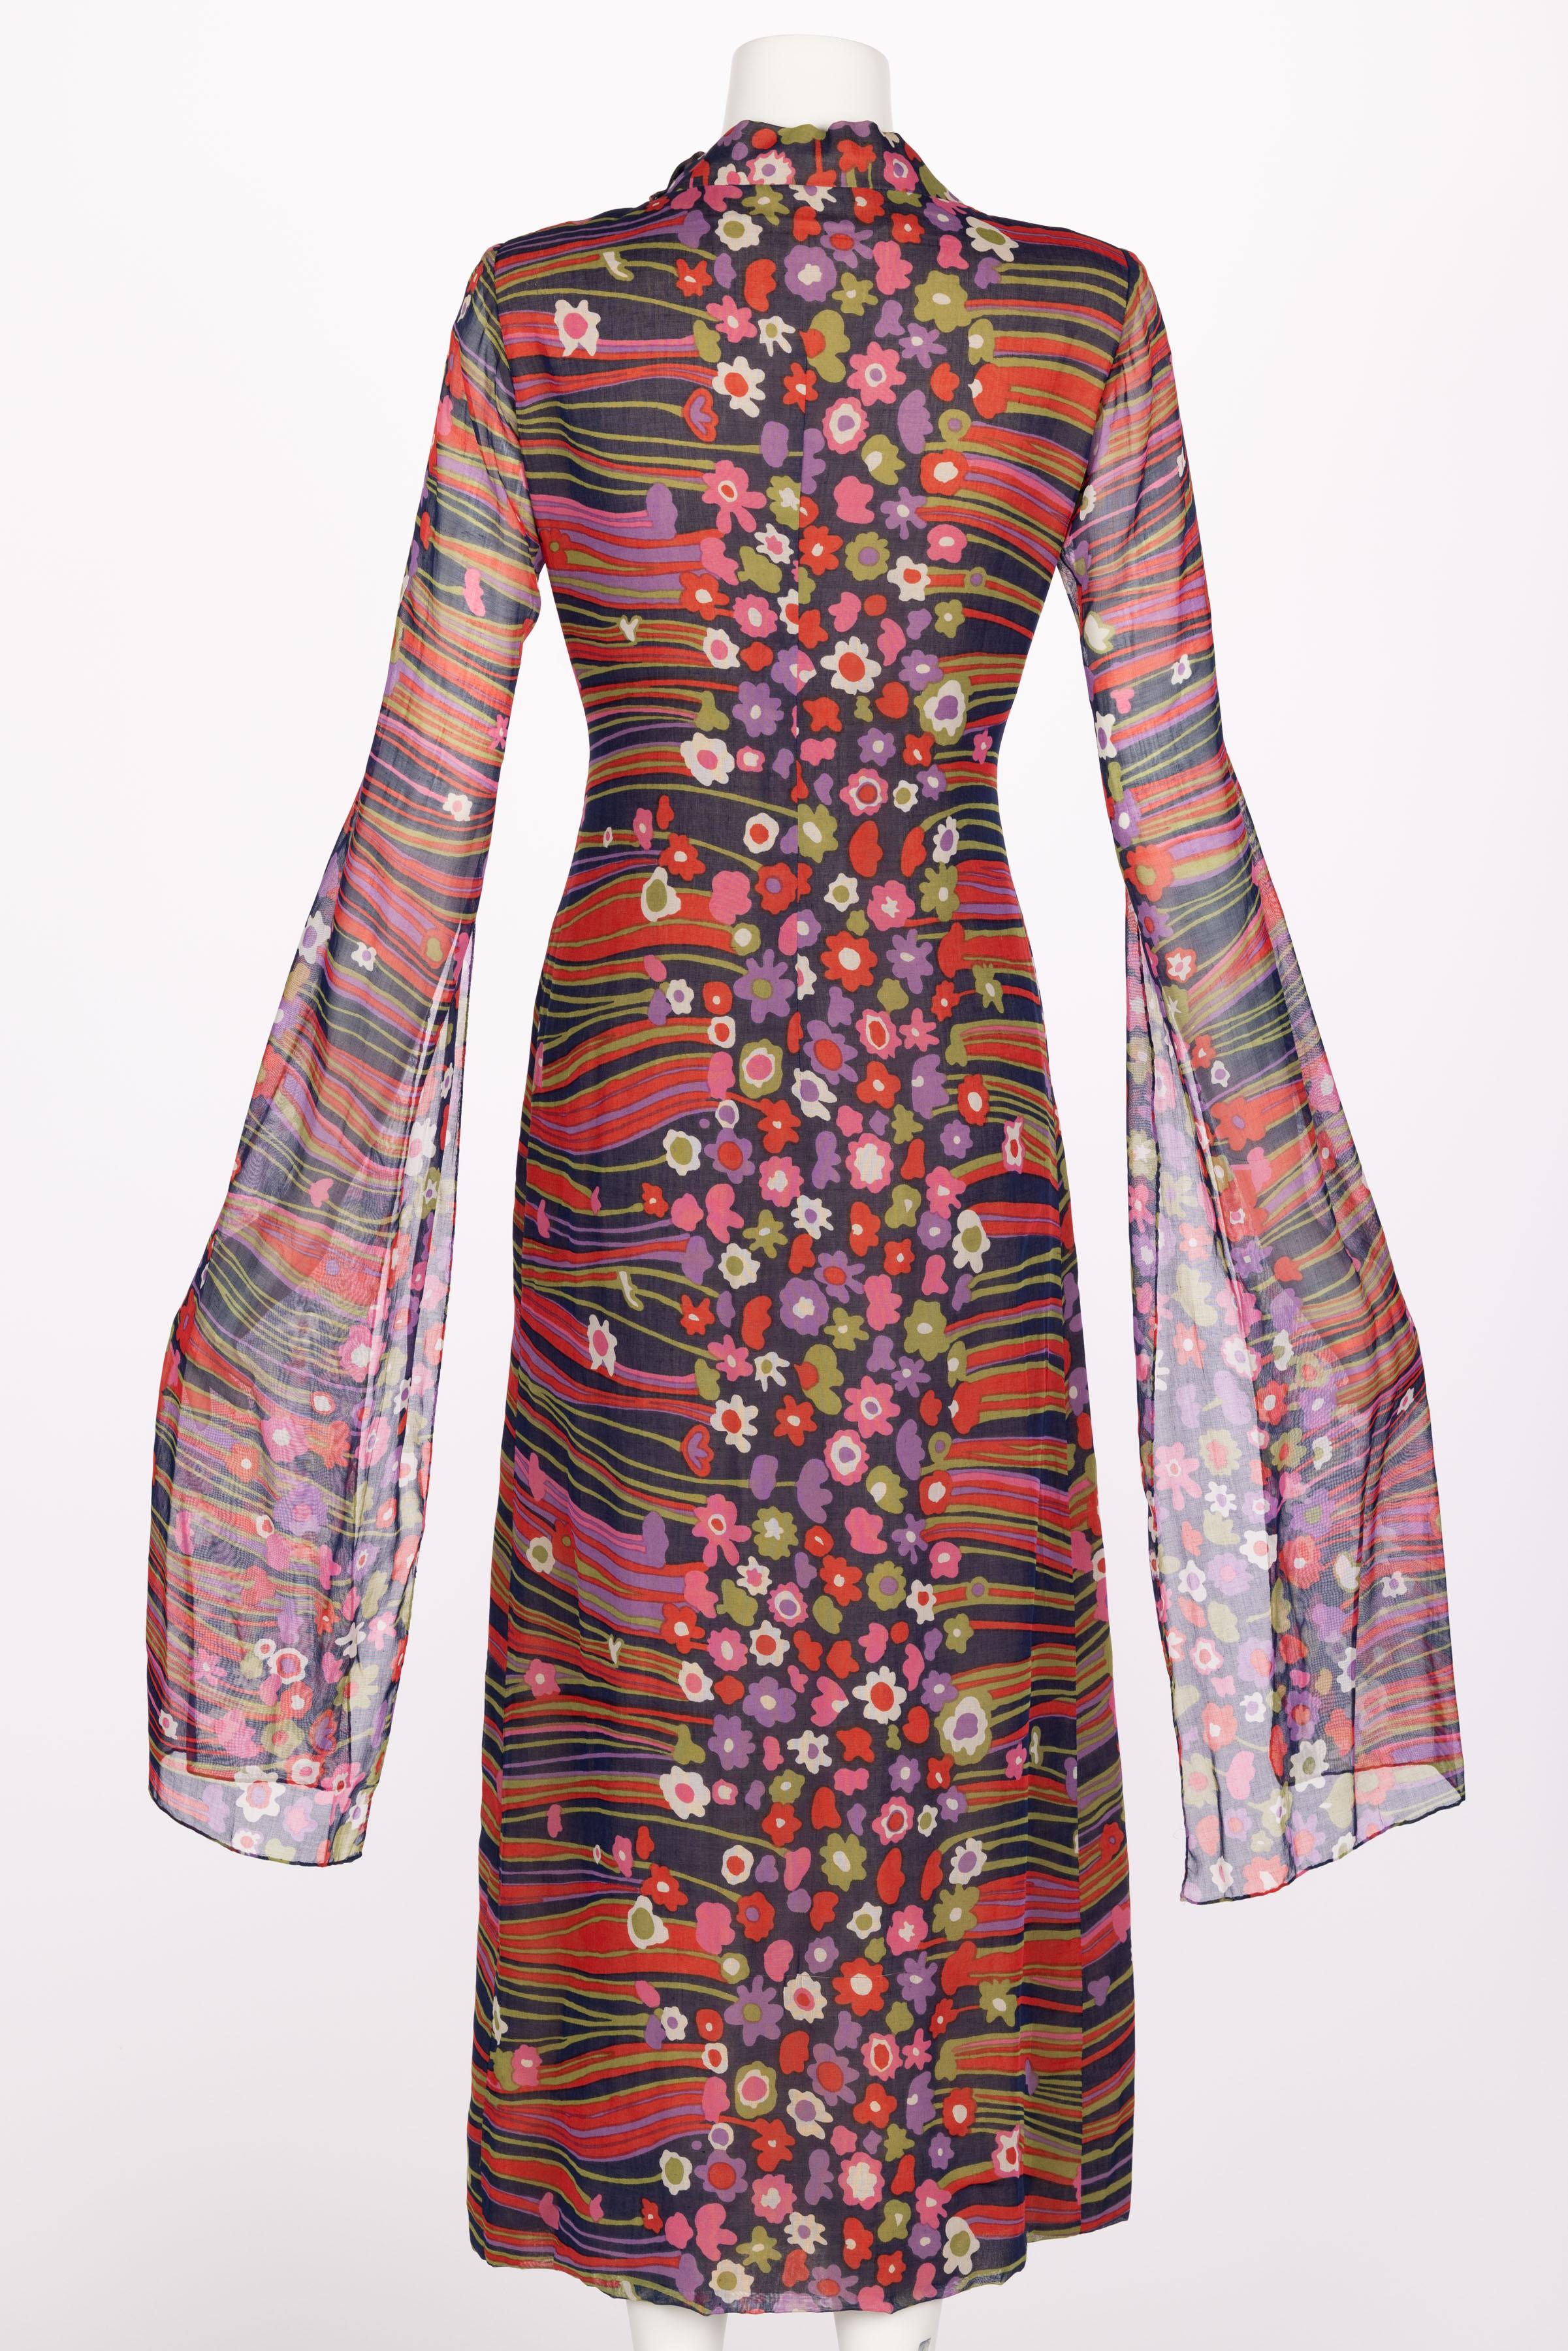 Pauline Trigère Abstract Floral Print Cotton Kimono Angel-Sleeve Dress, 1960s In Excellent Condition For Sale In Boca Raton, FL